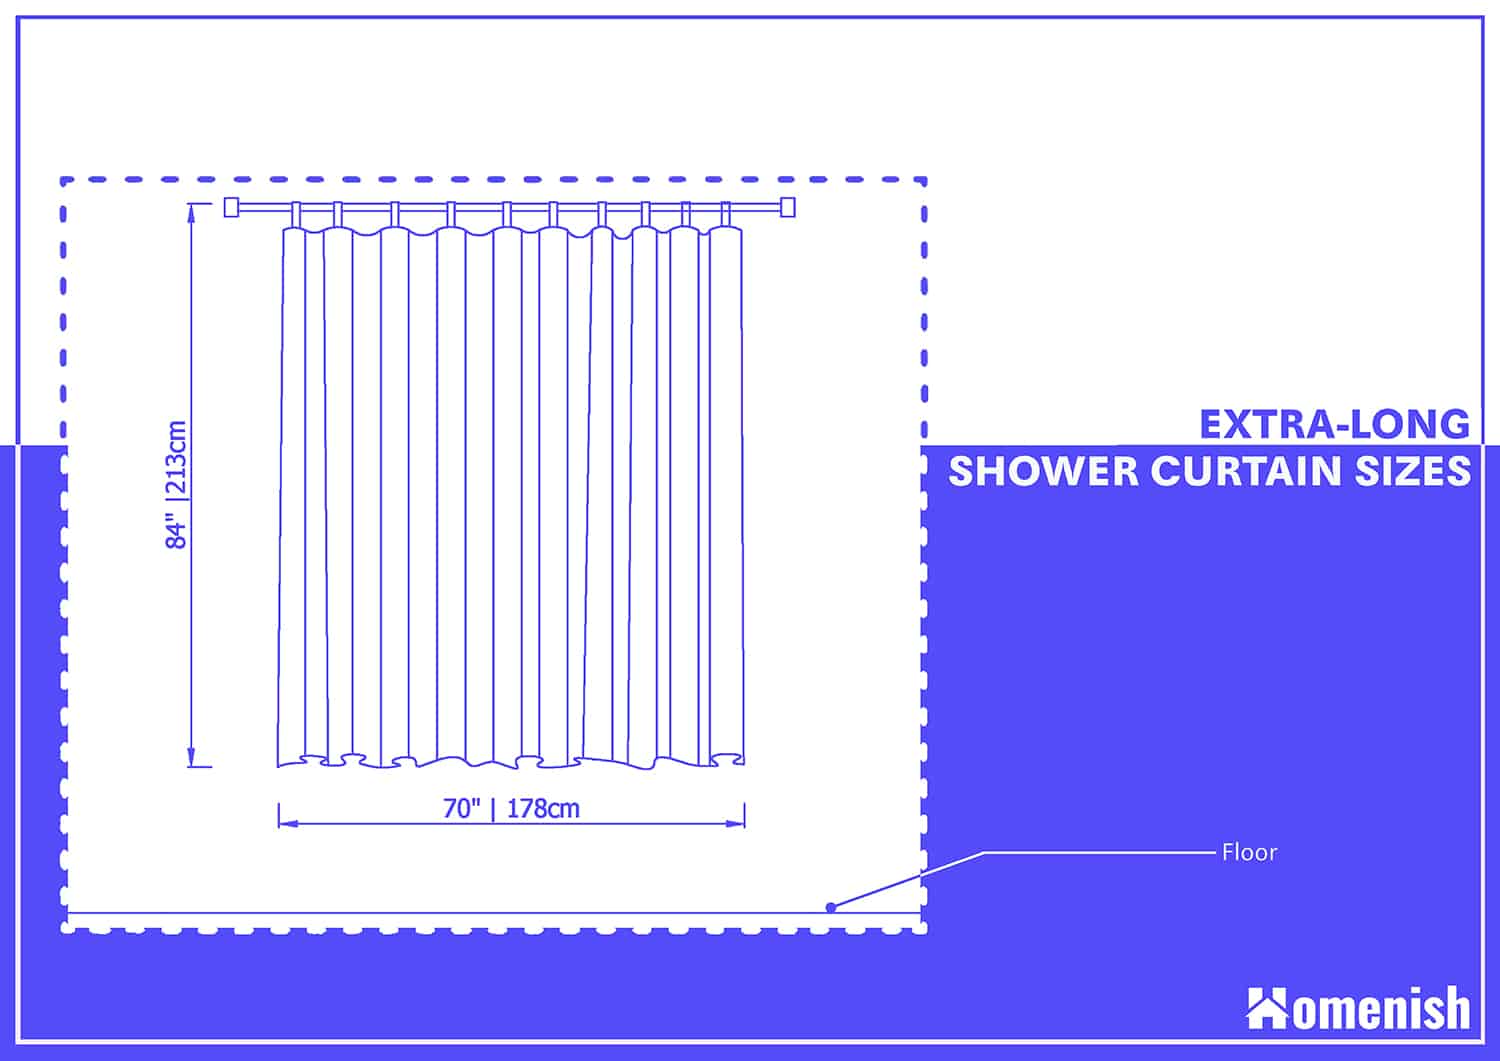 Extra-Long Shower Curtain Size